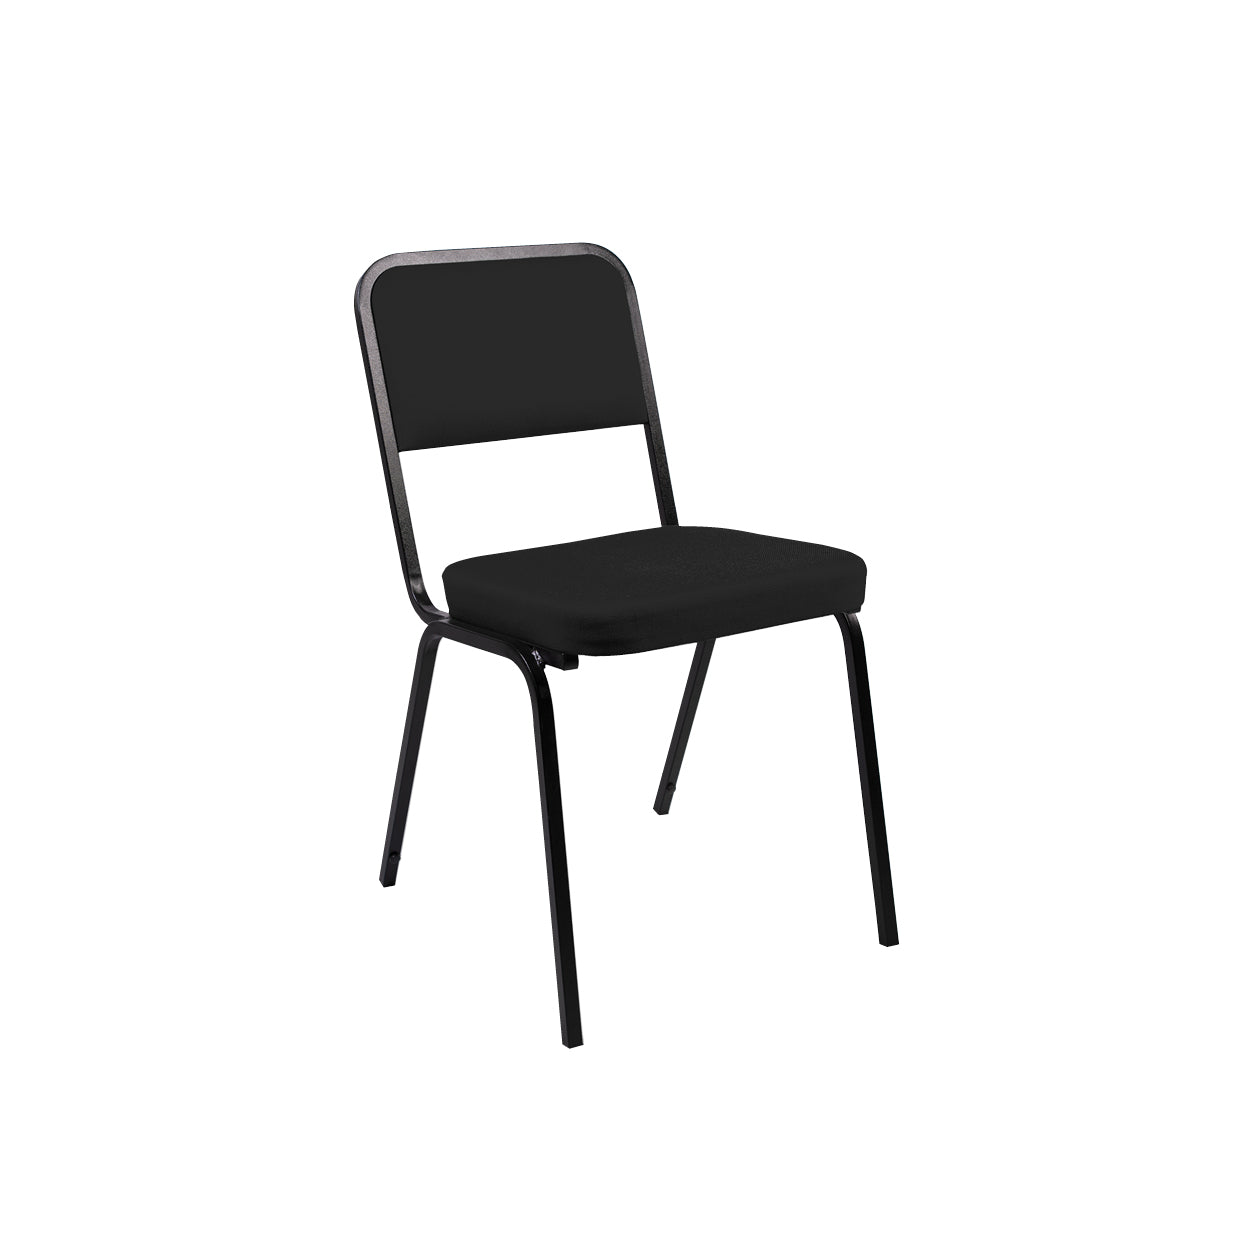 Hedcor chair